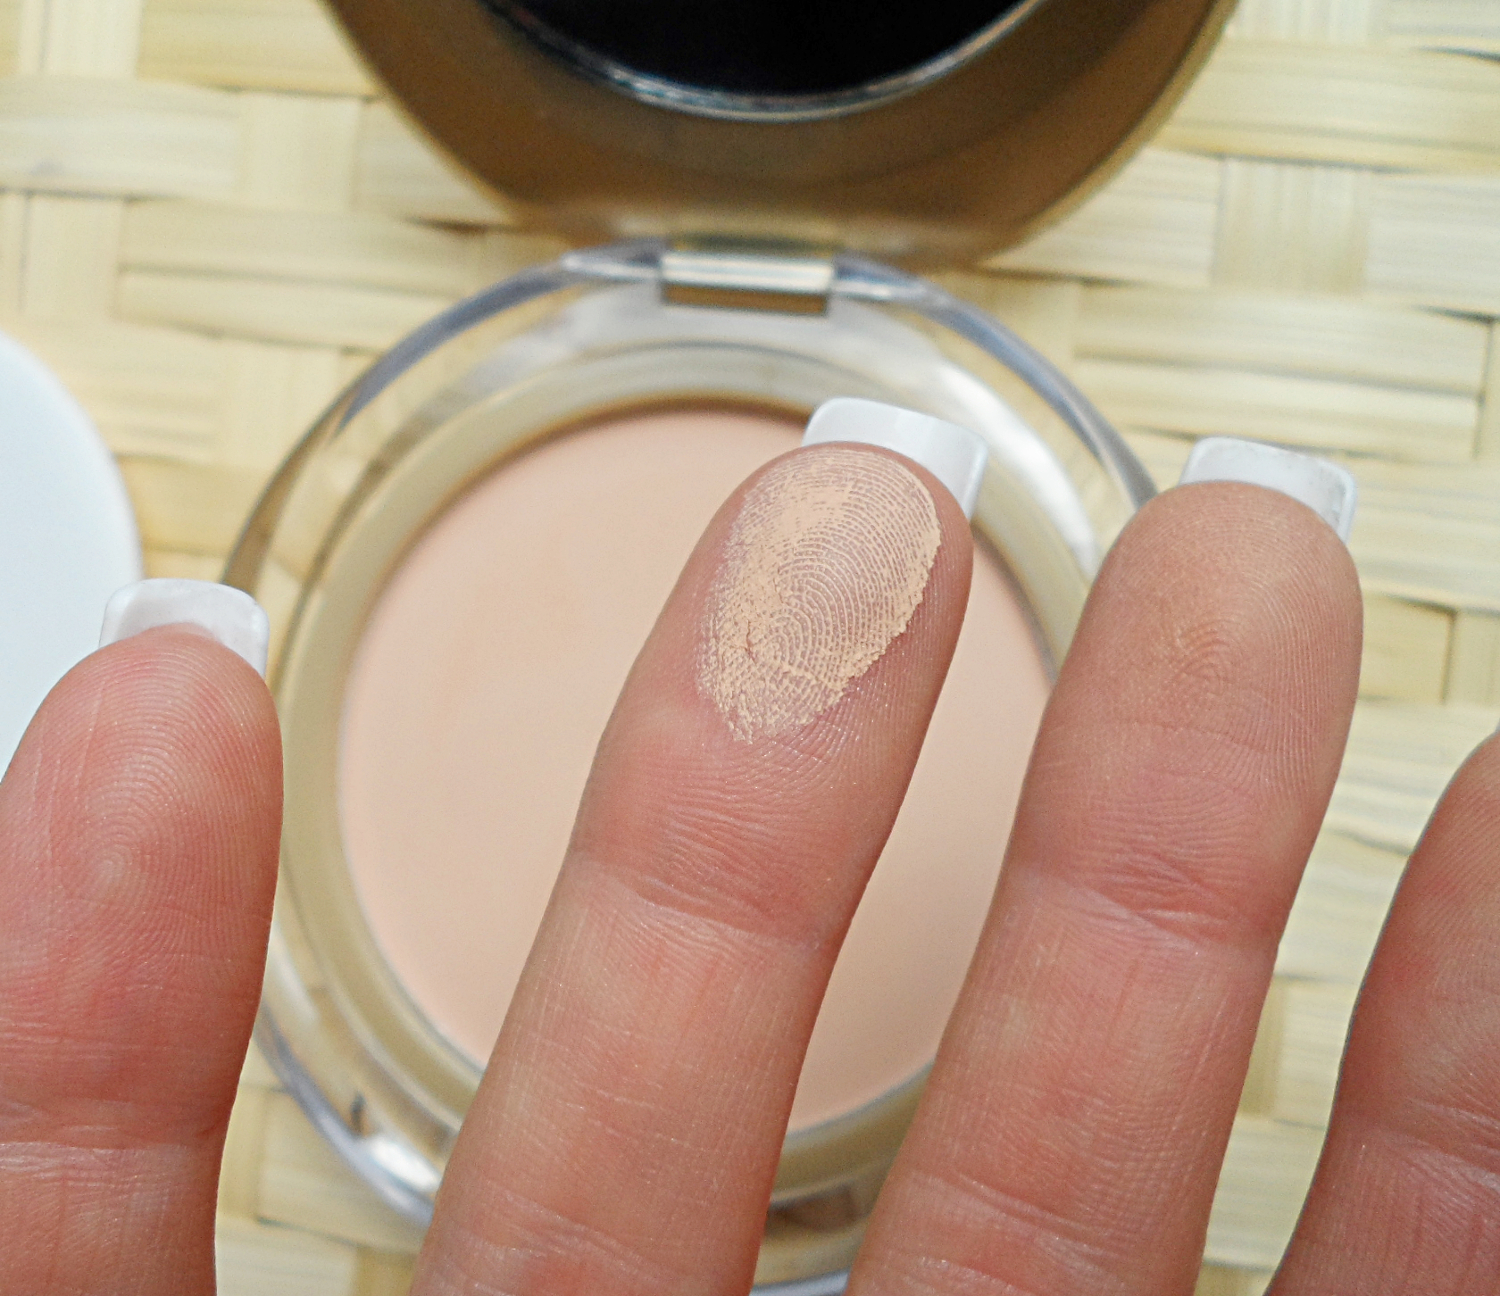 Pupa Silk Touch Compact Powder in Gold | Review & Swatches